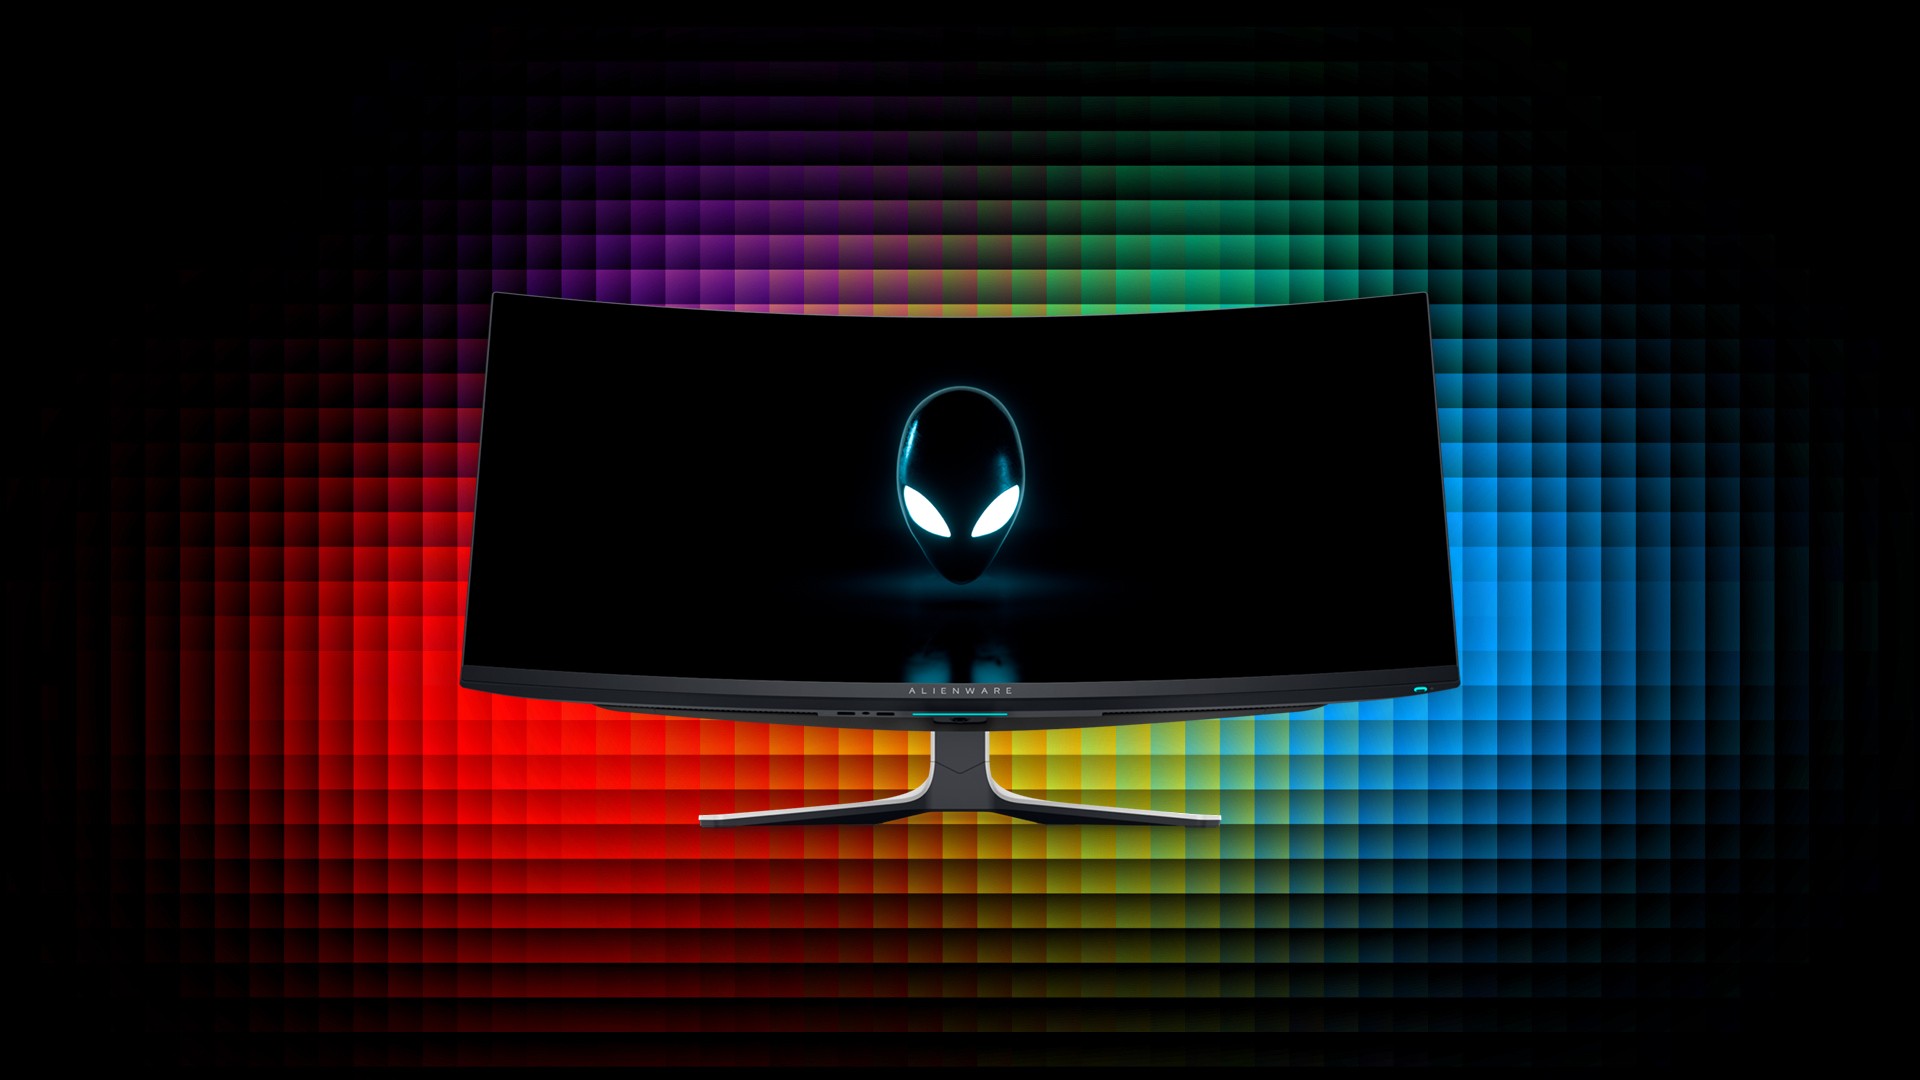 CES 2022: Meet the world's first curved QD-OLED monitor announced by Alienware